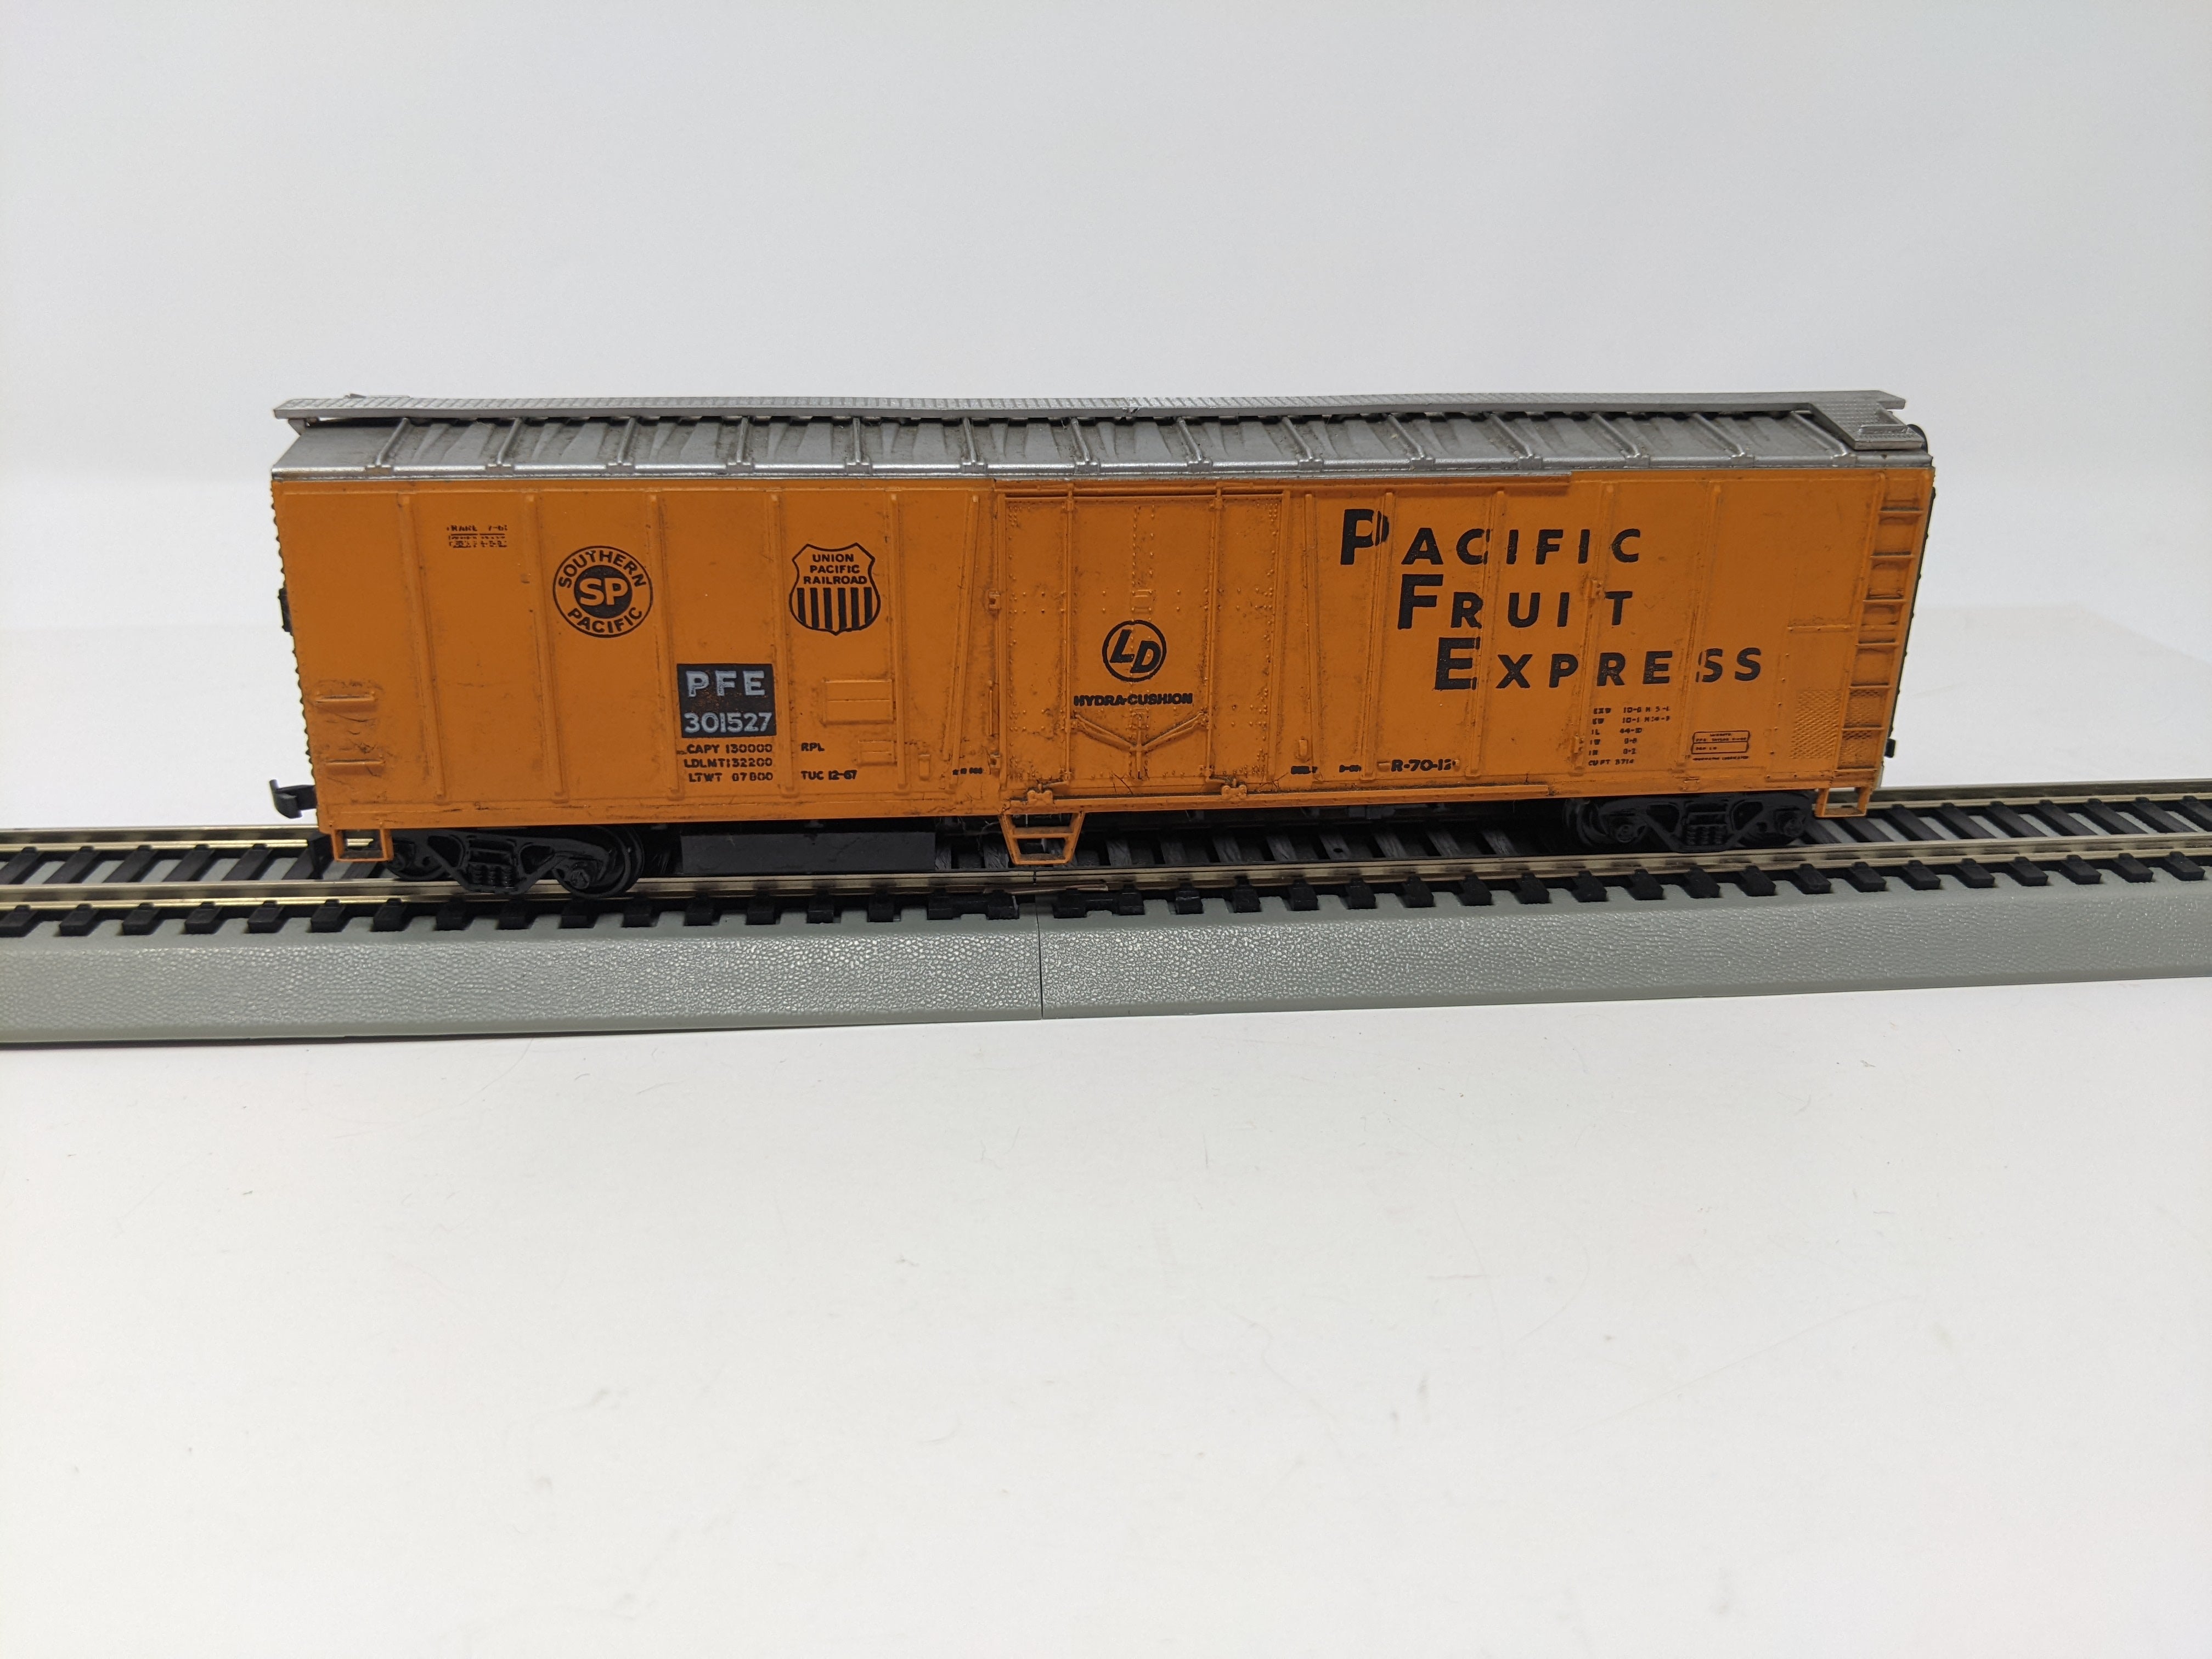 USED Athearn HO Scale, 50' Box Car, Pacific Fruit Express PFE #301527, Read Description